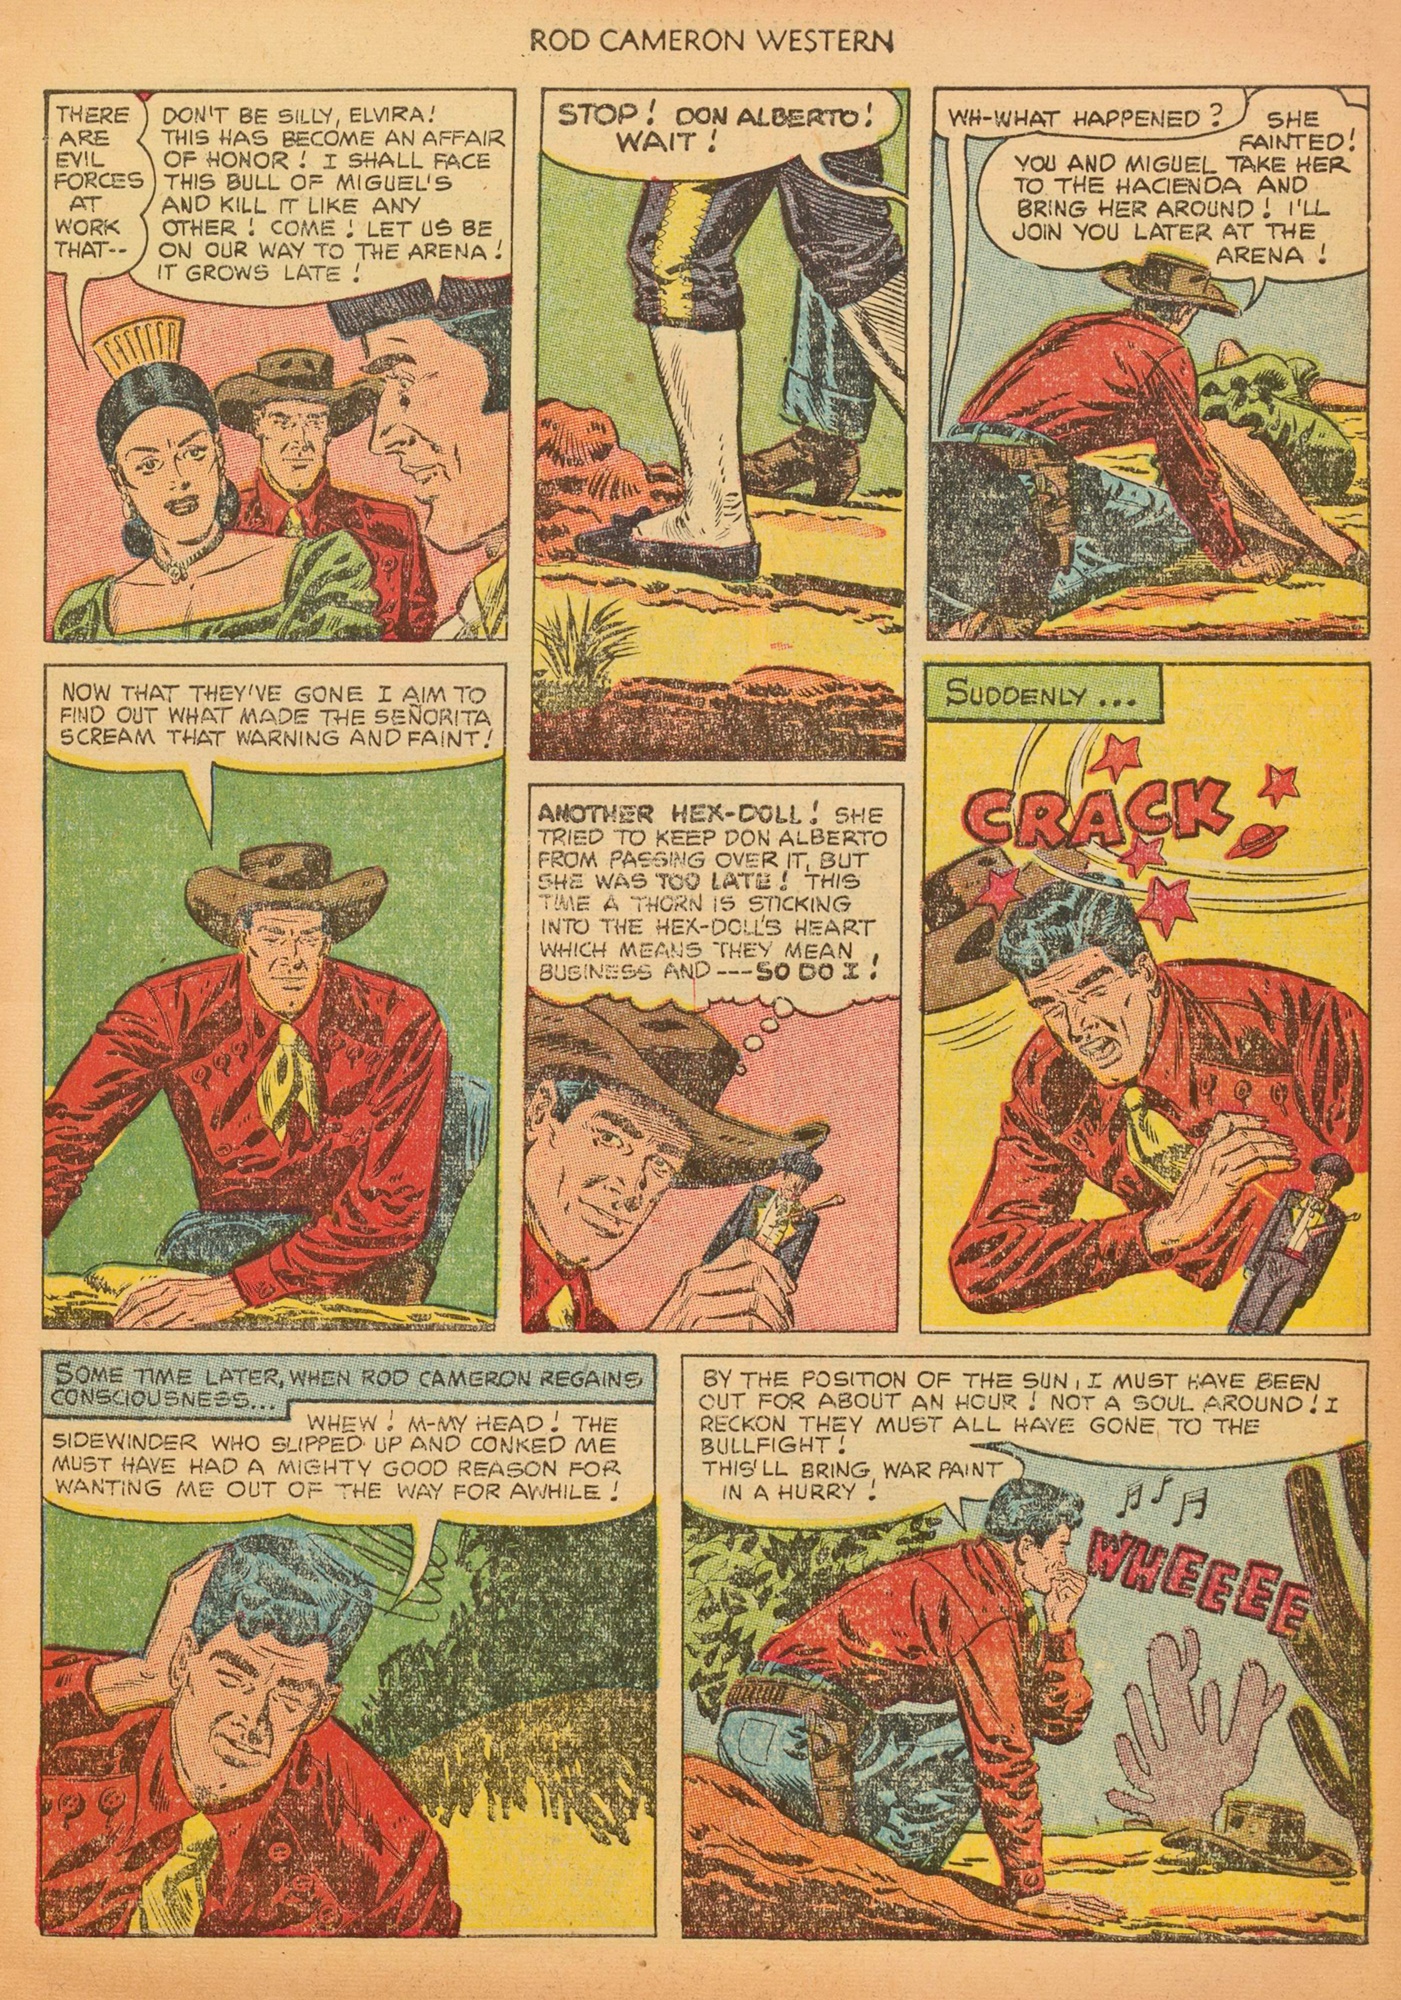 Read online Rod Cameron Western comic -  Issue #19 - 7